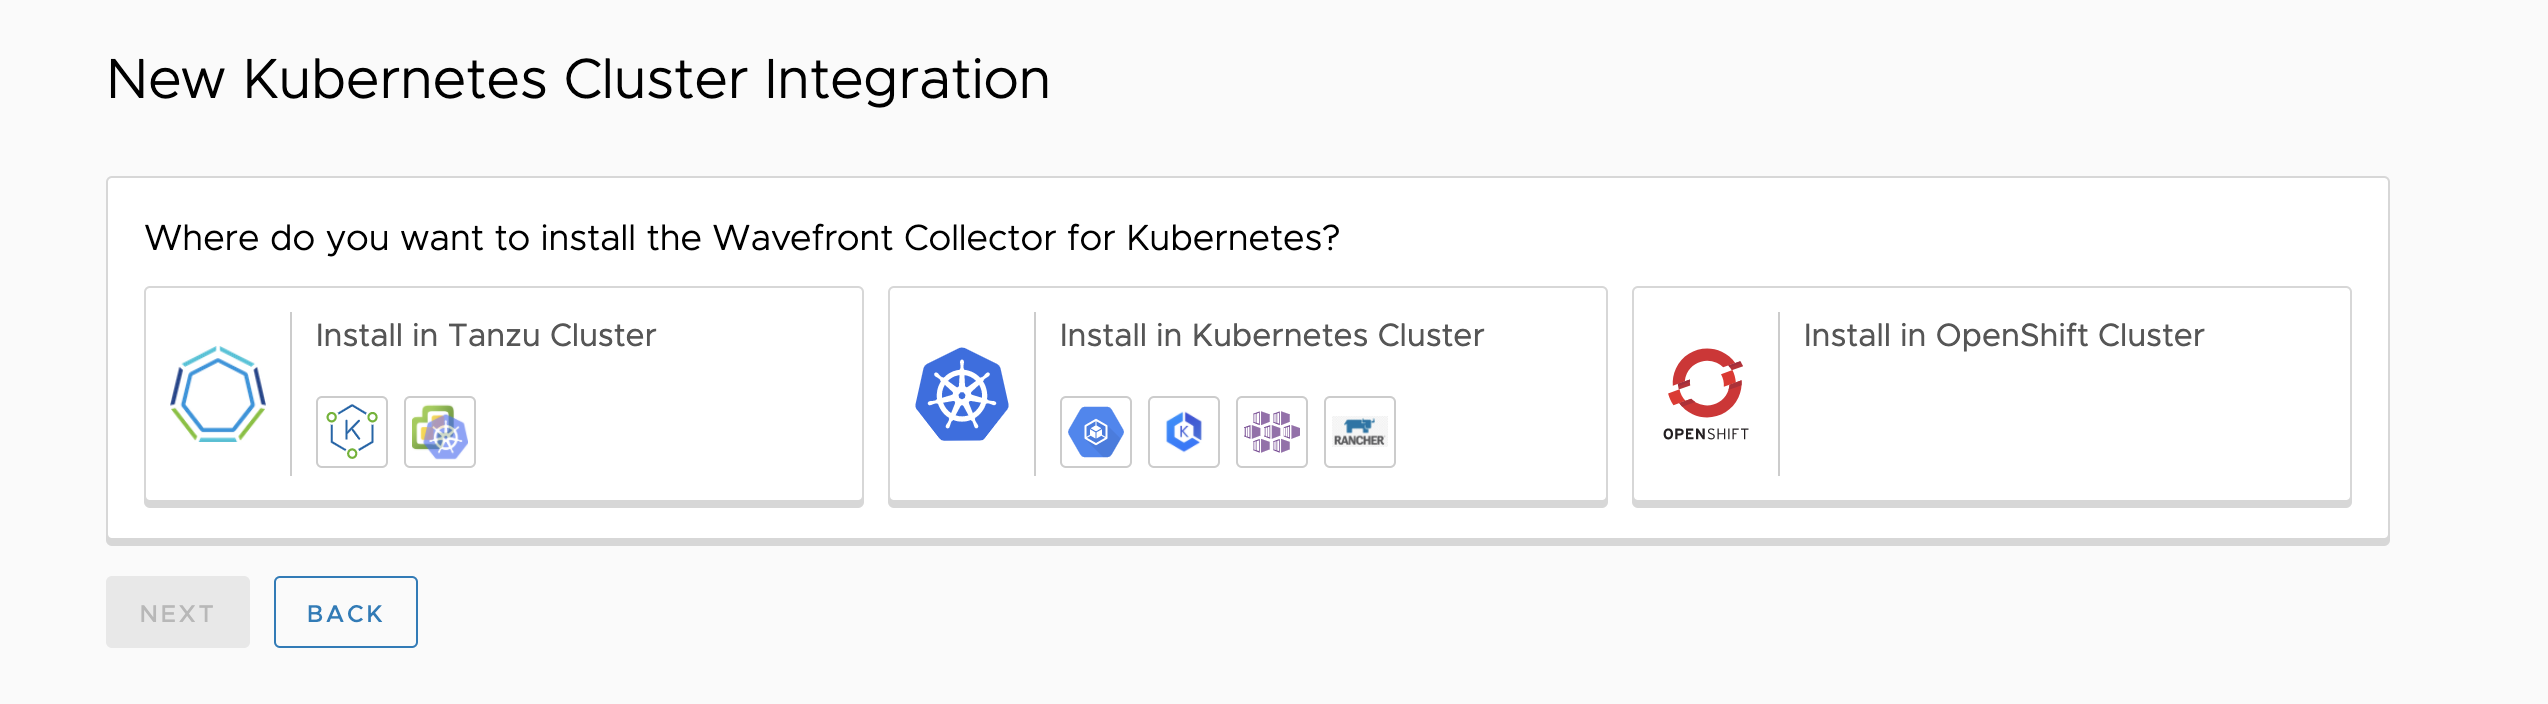 screenshot showing options to install in Tanzu, Kubernetes, or Openshift cluster